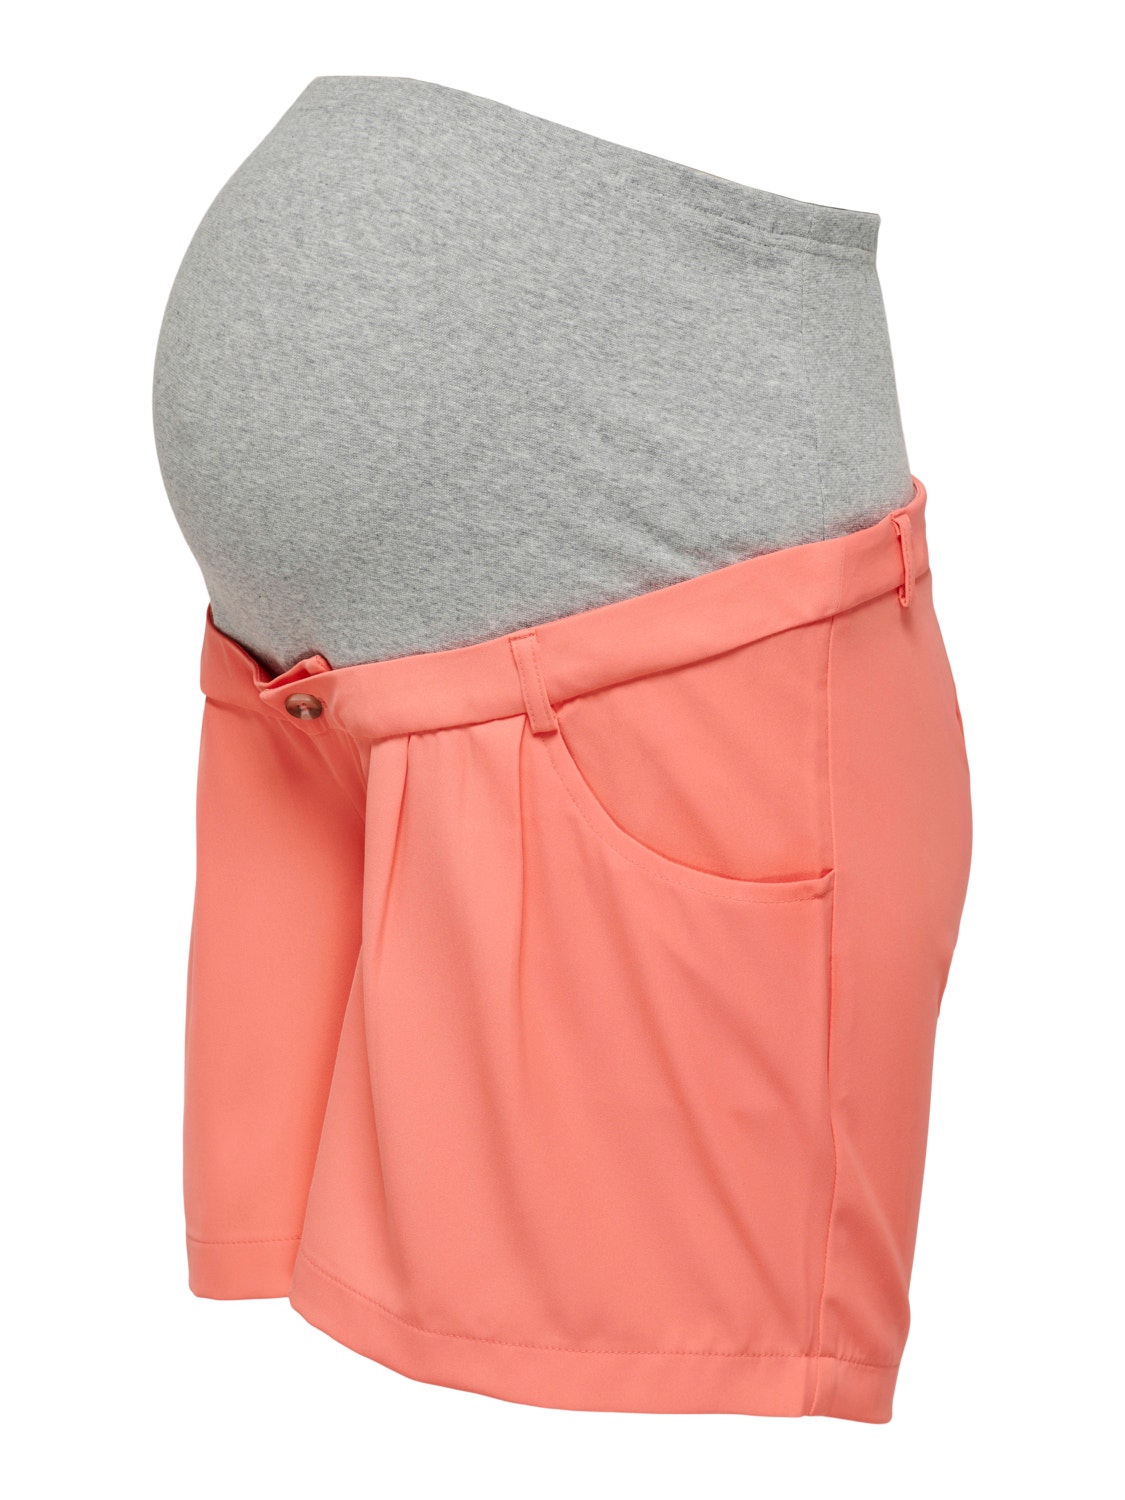 ONLY Relaxed Fit Høy midje Maternity Shorts -Georgia Peach - 15296449